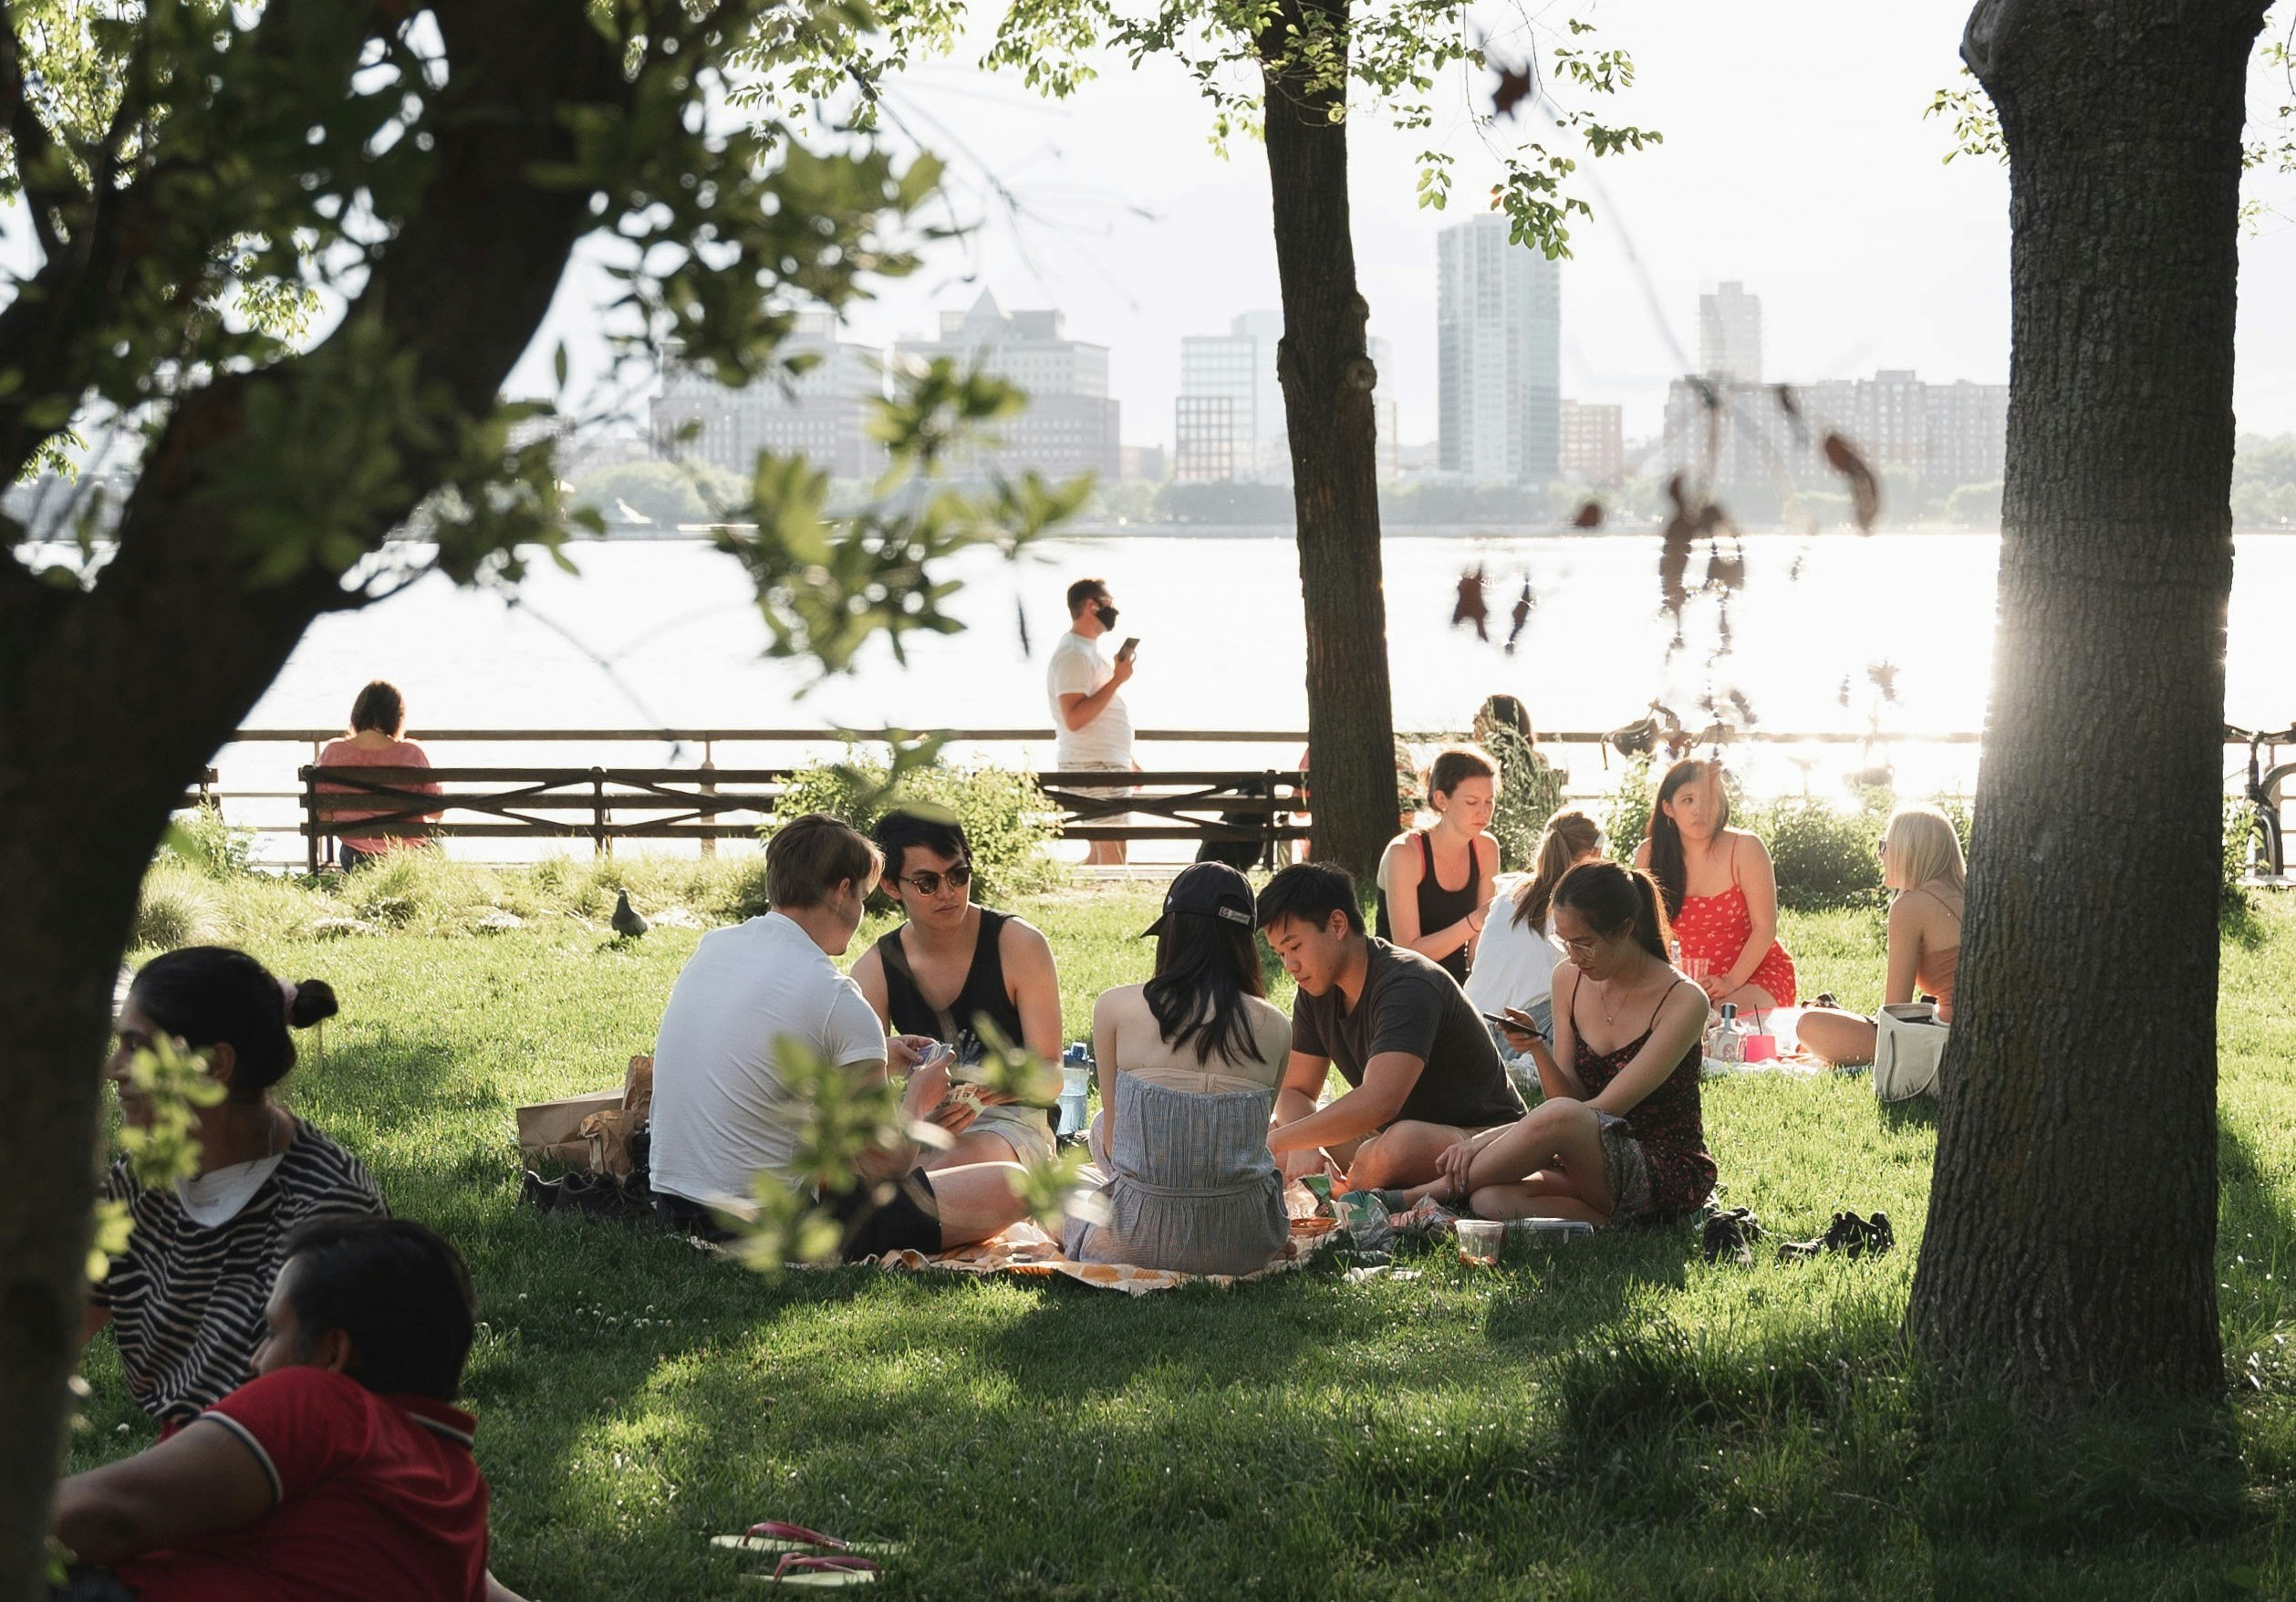 people having a picnic in a park with a city skyline in the far background